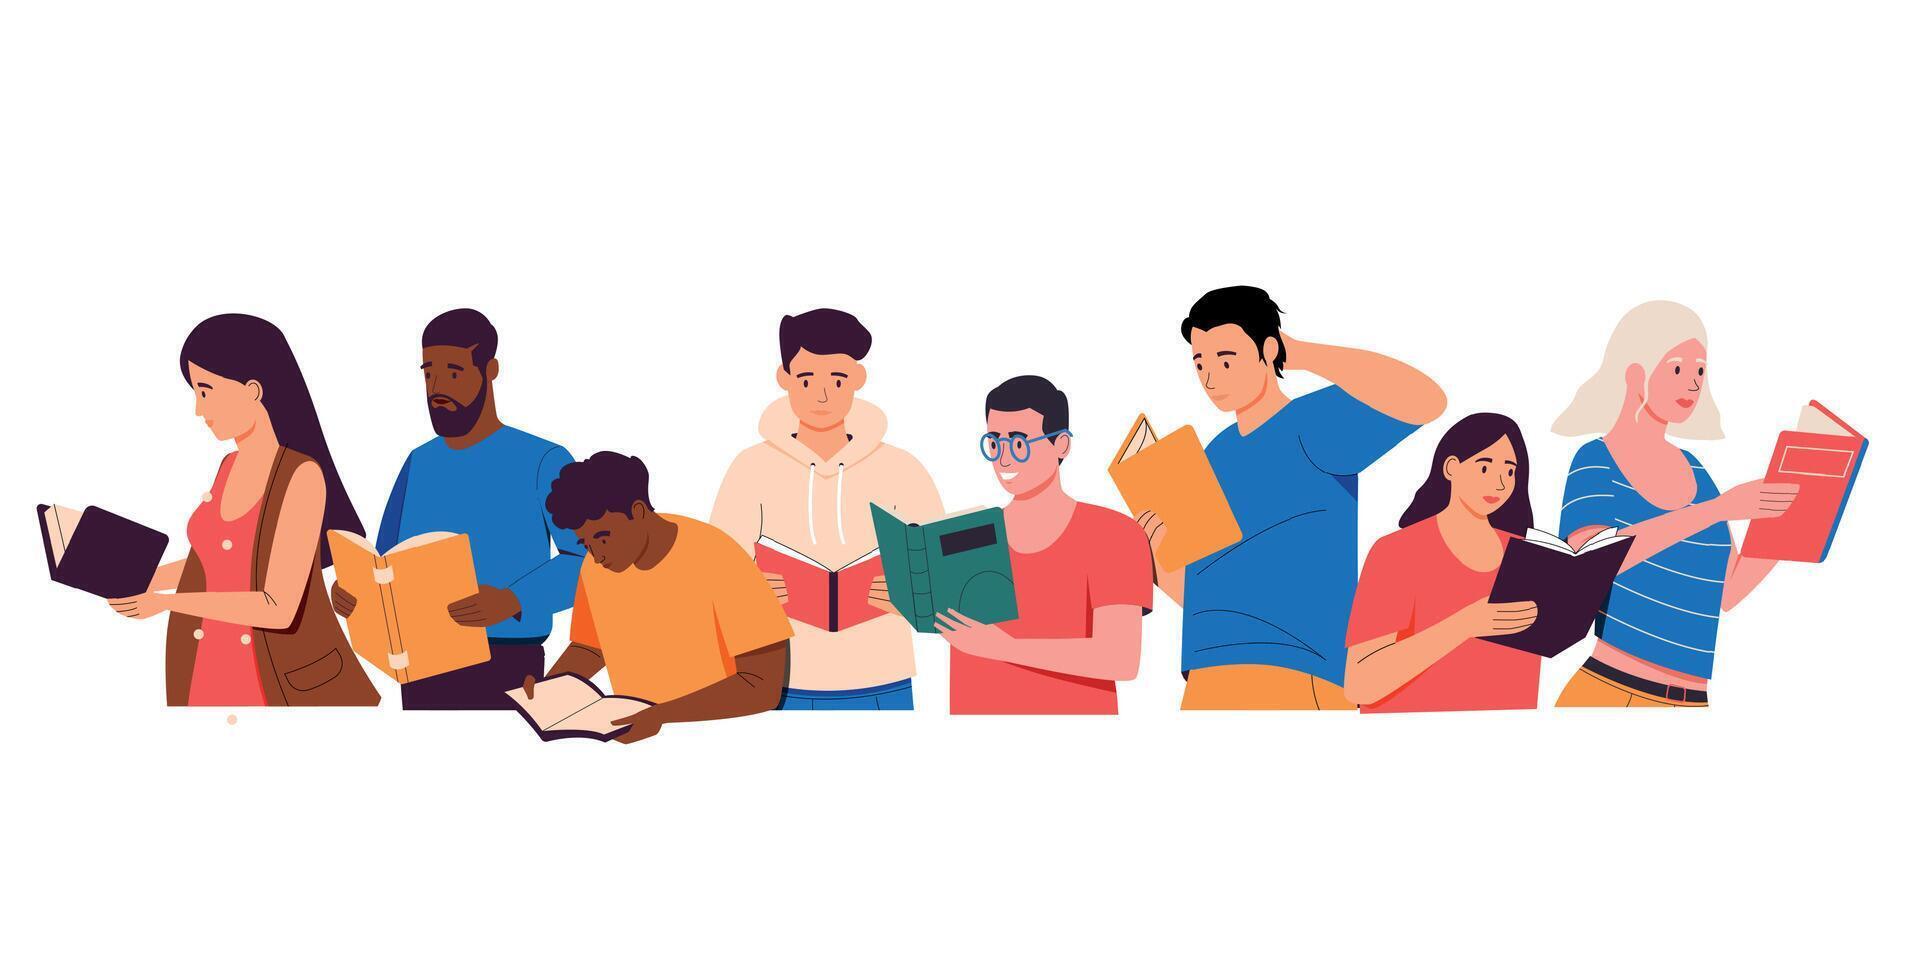 People group with books. Cartoon men and women holding and reading books, self-education concept vector